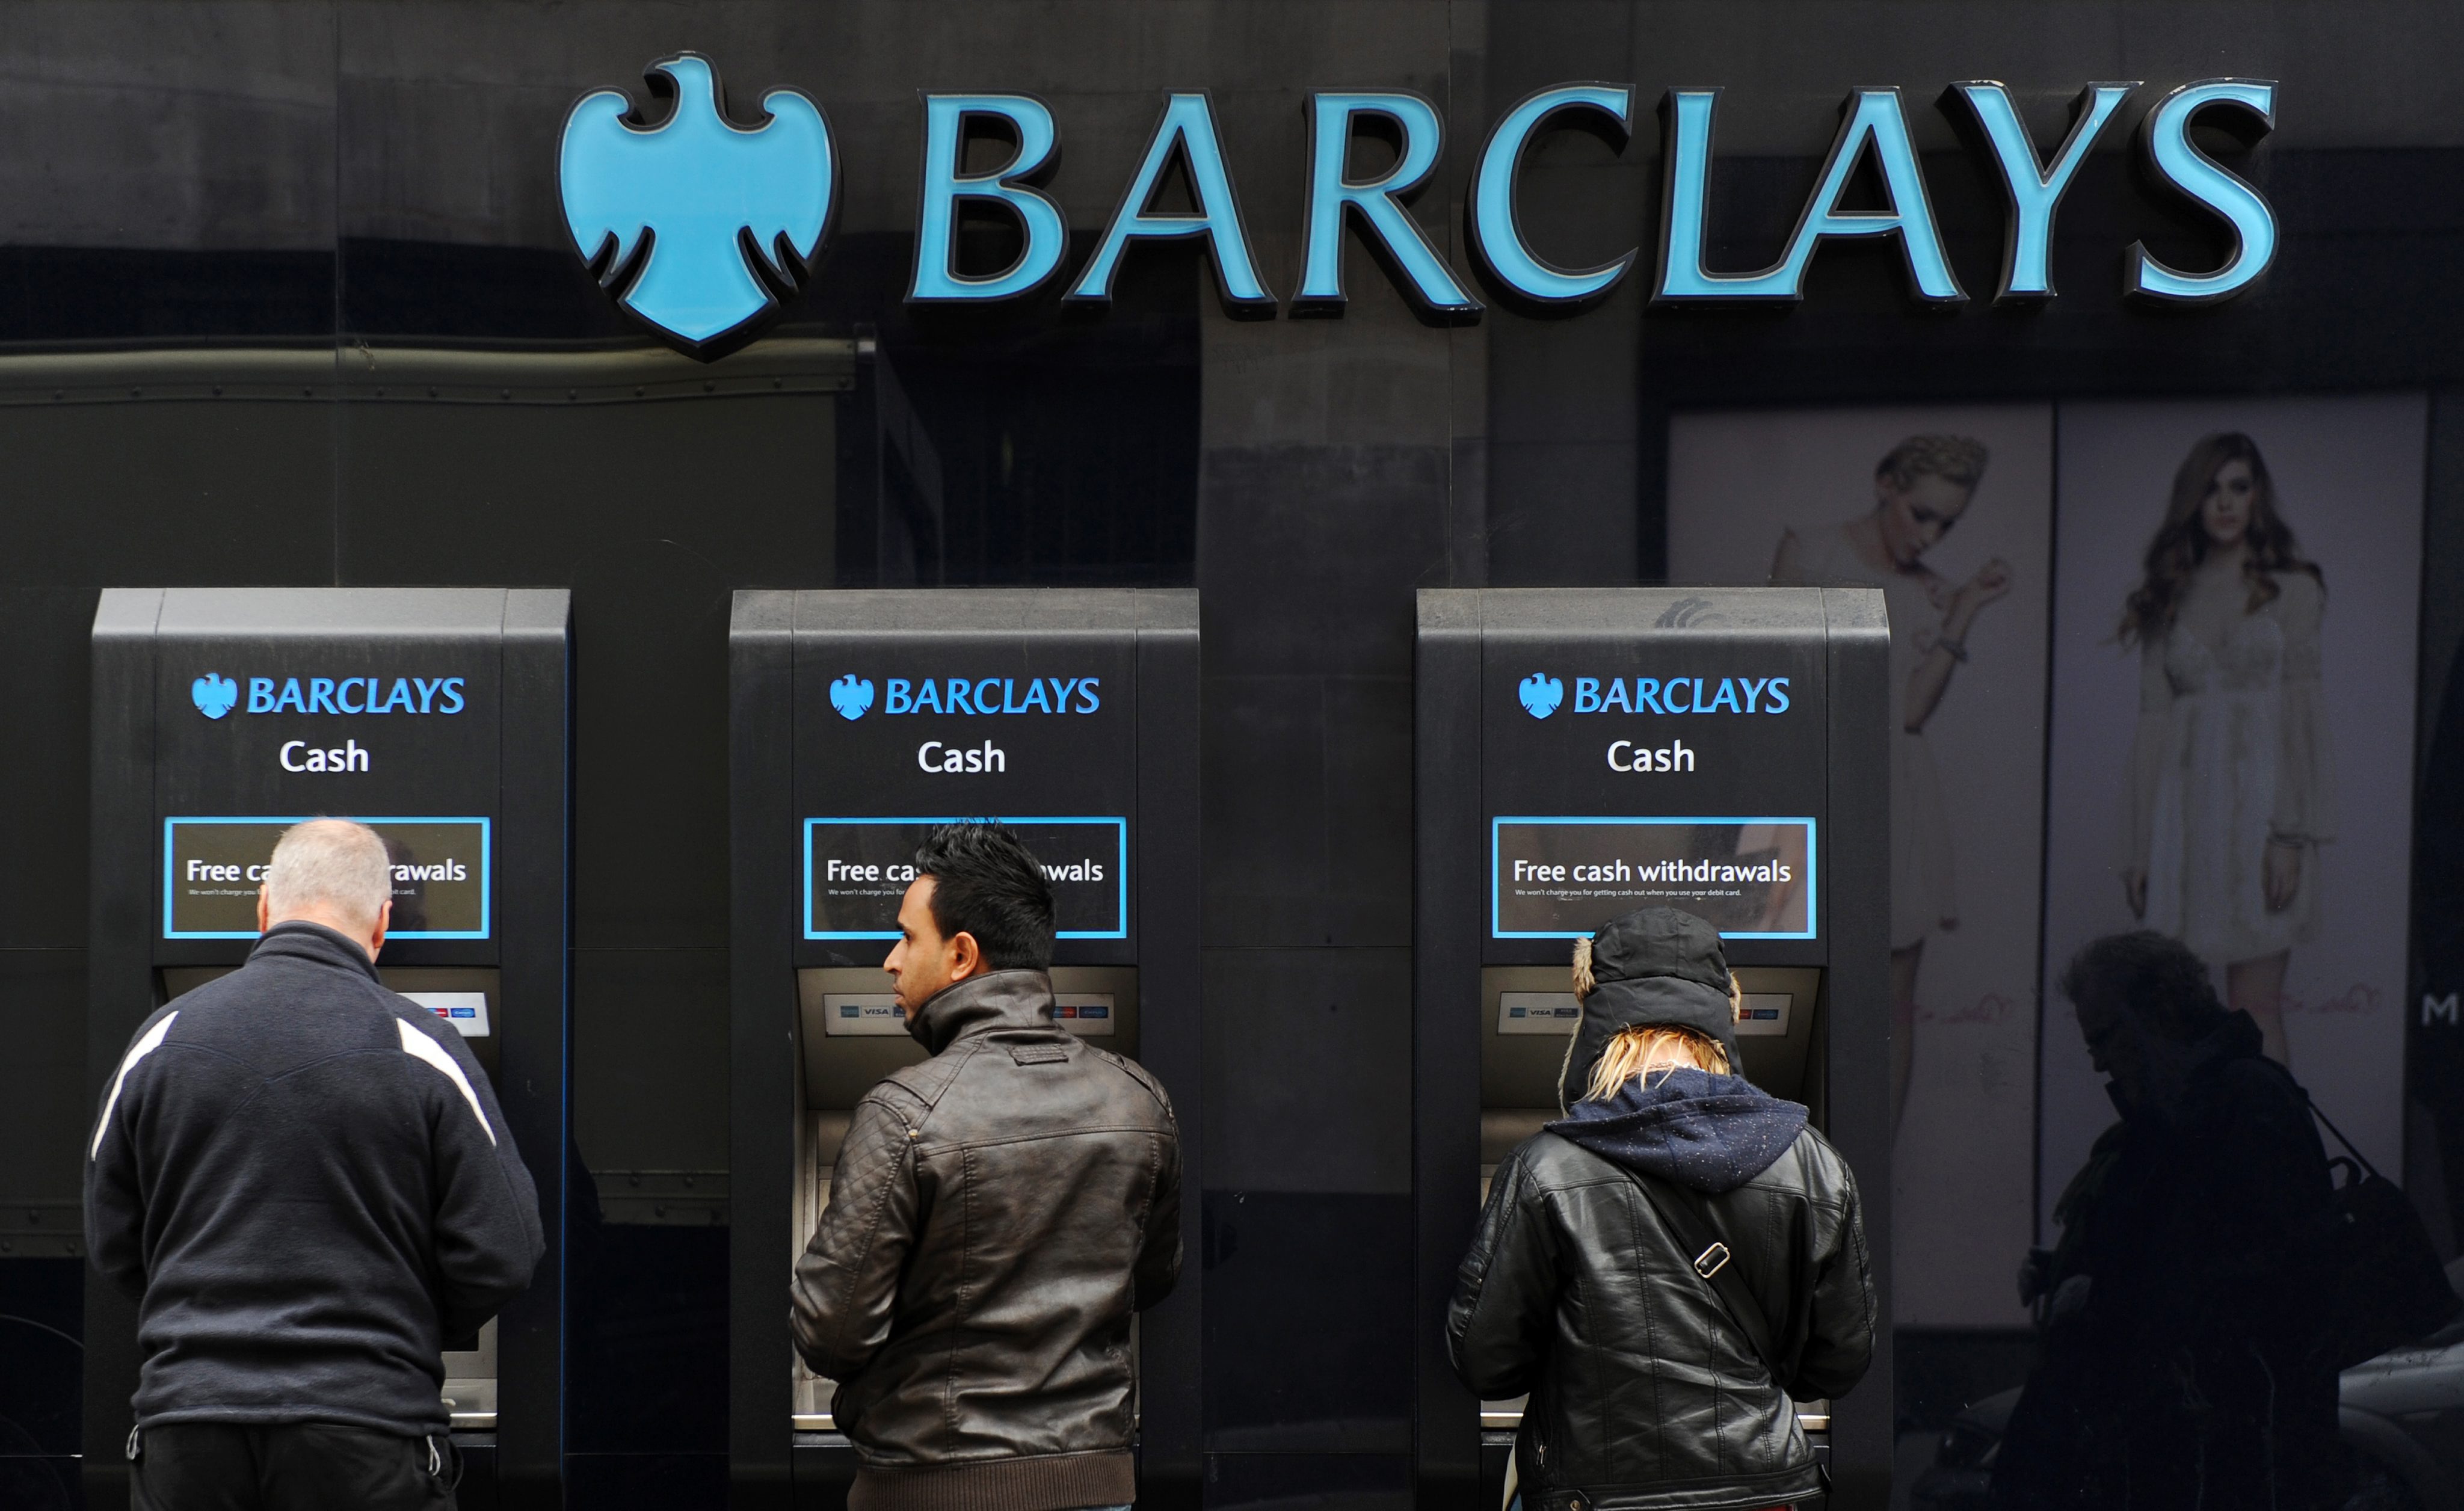 epa04469830 (FILE) A file photo dated 03 Aprilo 2013 showing customers usin g ATM machines outside a Barclays bank branch in London, Britain. British bank Barclays PLC said 30 October 2014 it had set aside 500 million pounds (800 million dollars) to cover any costs arising from global investigations into the alleged manipulation by banks of currency trading. Britain's Serious Fraud Office and Financial Conduct Authority are among regulators around the world looking into allegations that traders used online chatrooms to rig prices. Barclays is among the banks that have suspended currency traders for alleged market manipulation. The provision for possible fines was contained in results that showed a rise in pre-tax profits for the first nine months of the year to 3.7 billion pounds, from 2.8 billion pounds in the corresponding period a year earlier. EPA/ANDY RAIN